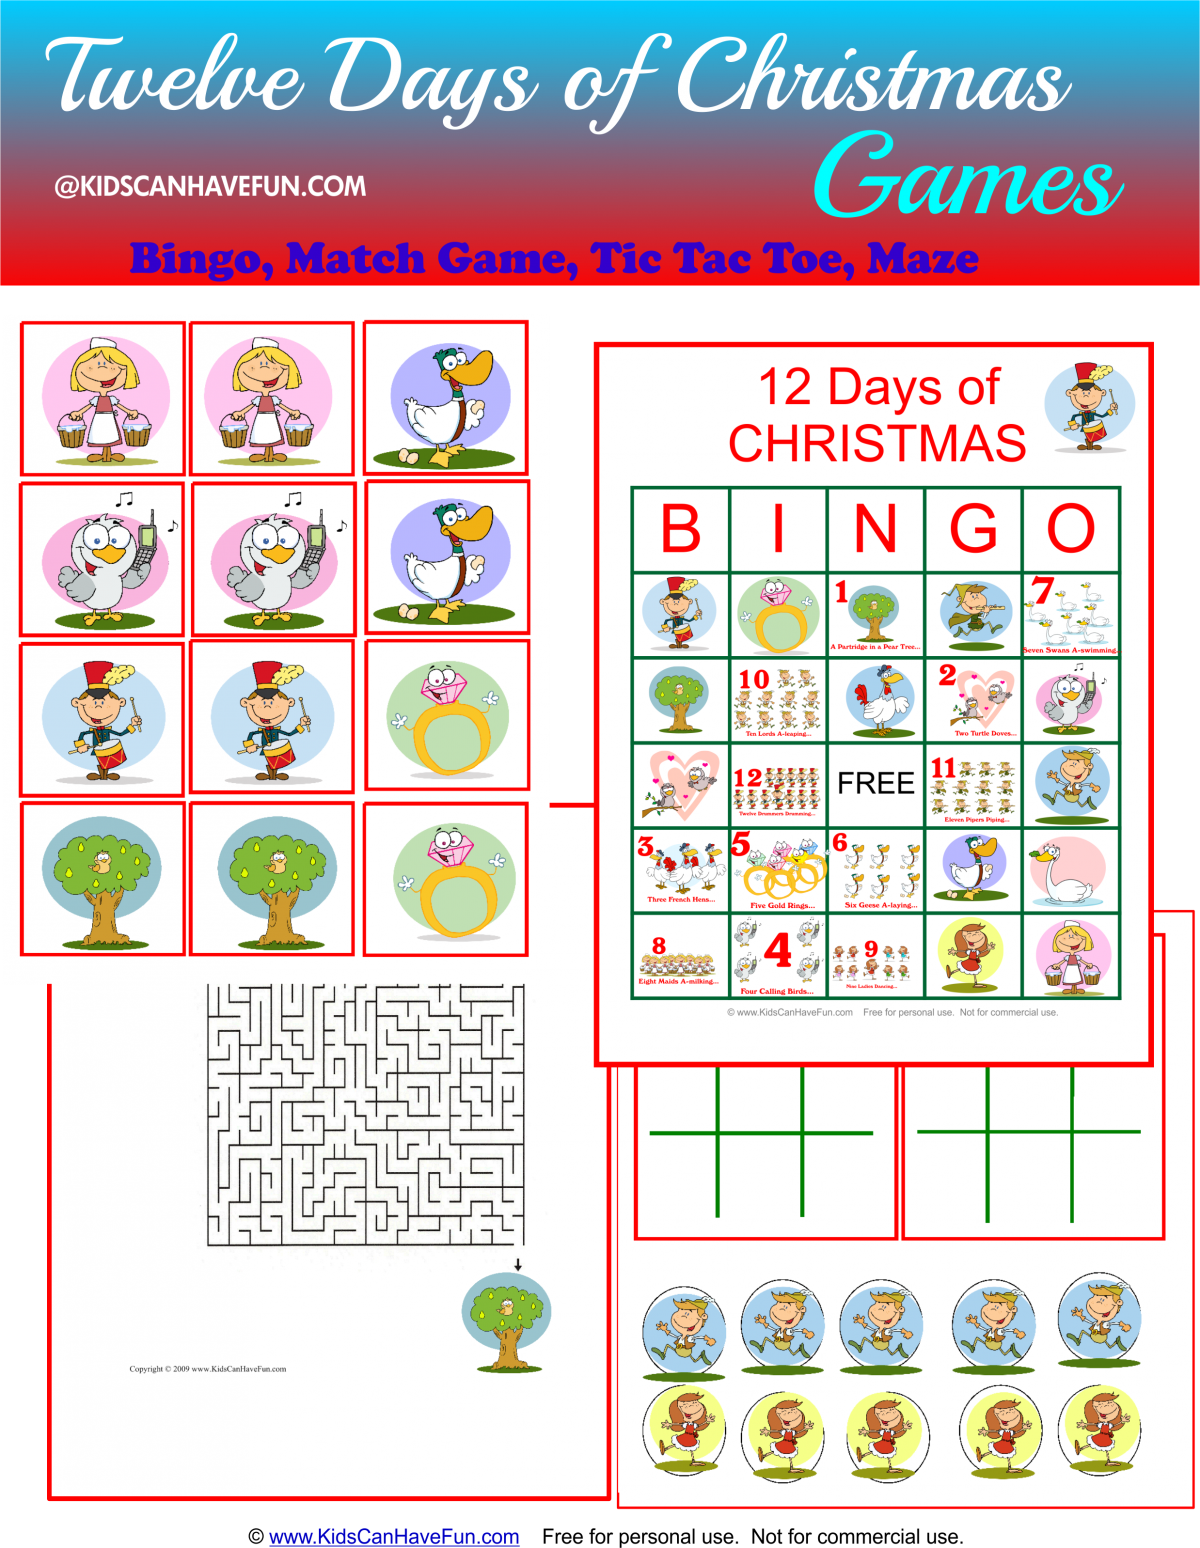 the-twelve-days-of-christmas-activities-sing-along-printables